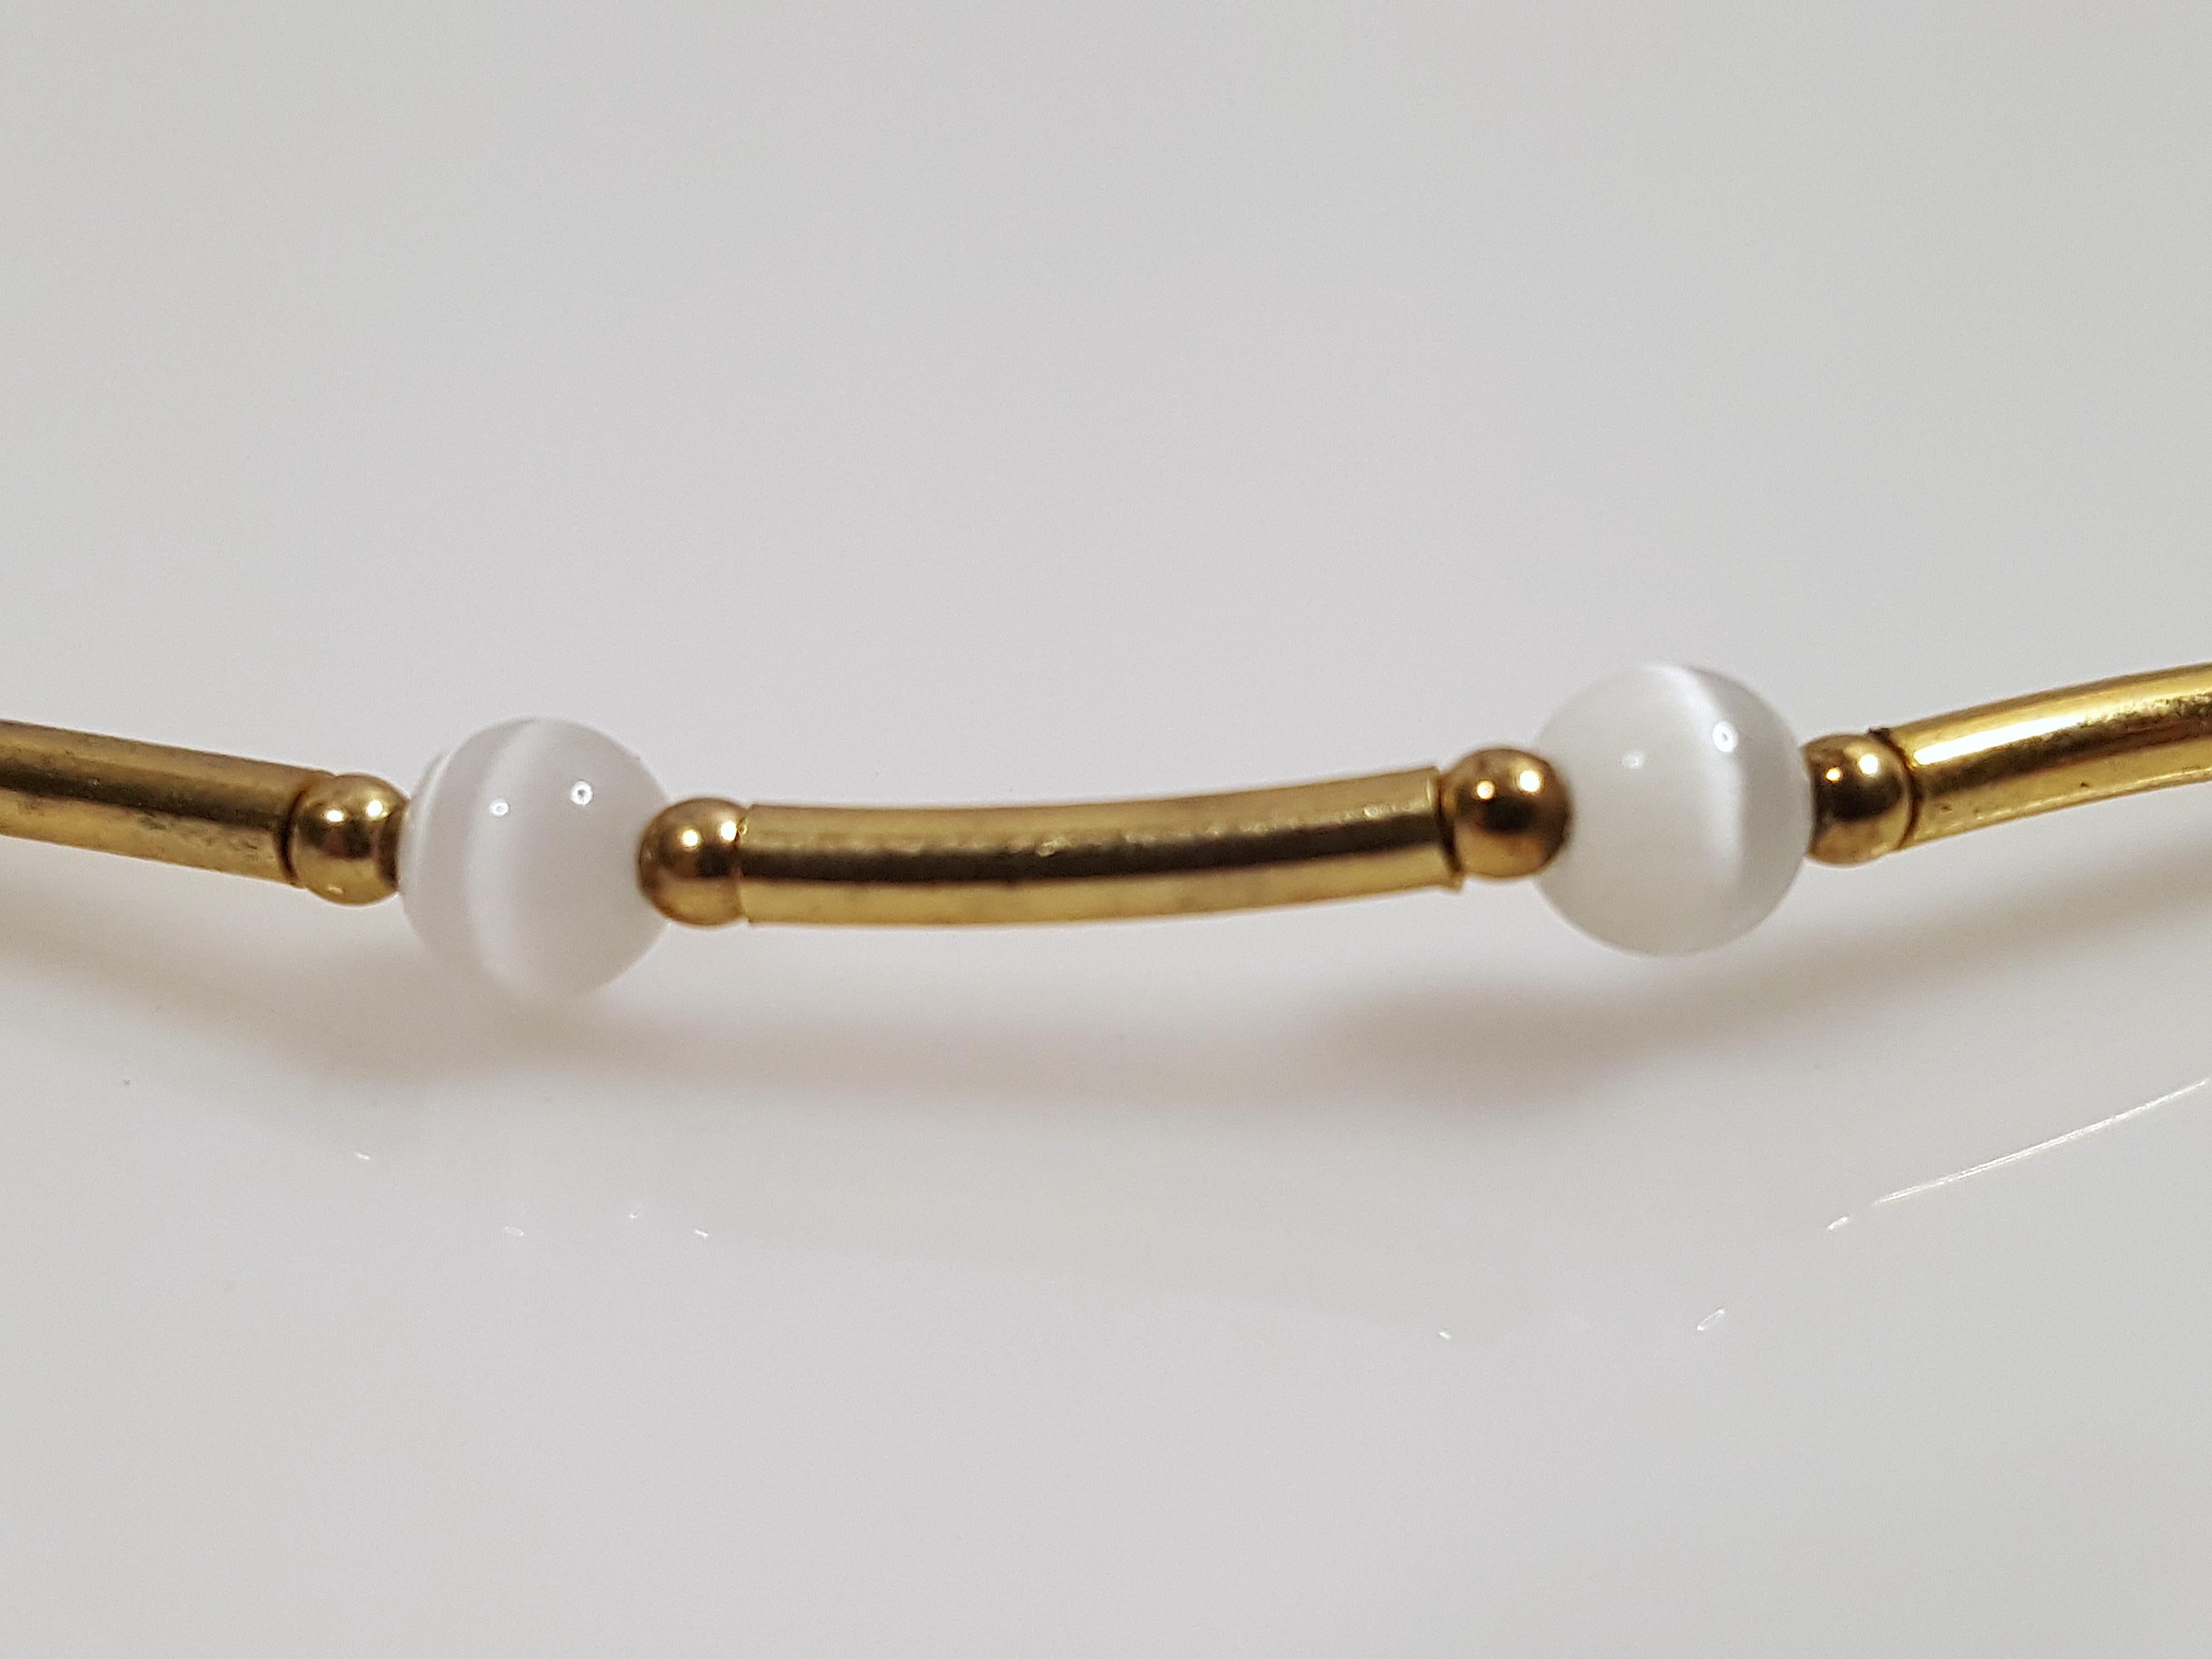 All featuring white cat's eyes, 21 gray 3mm ball-cut moonstones are beaded on this antique symmetrical choker necklace between stations of shiny 14-karat gold-filled tubes that are bracketed by gold ball spacers. Resembling modern minimal Cartier